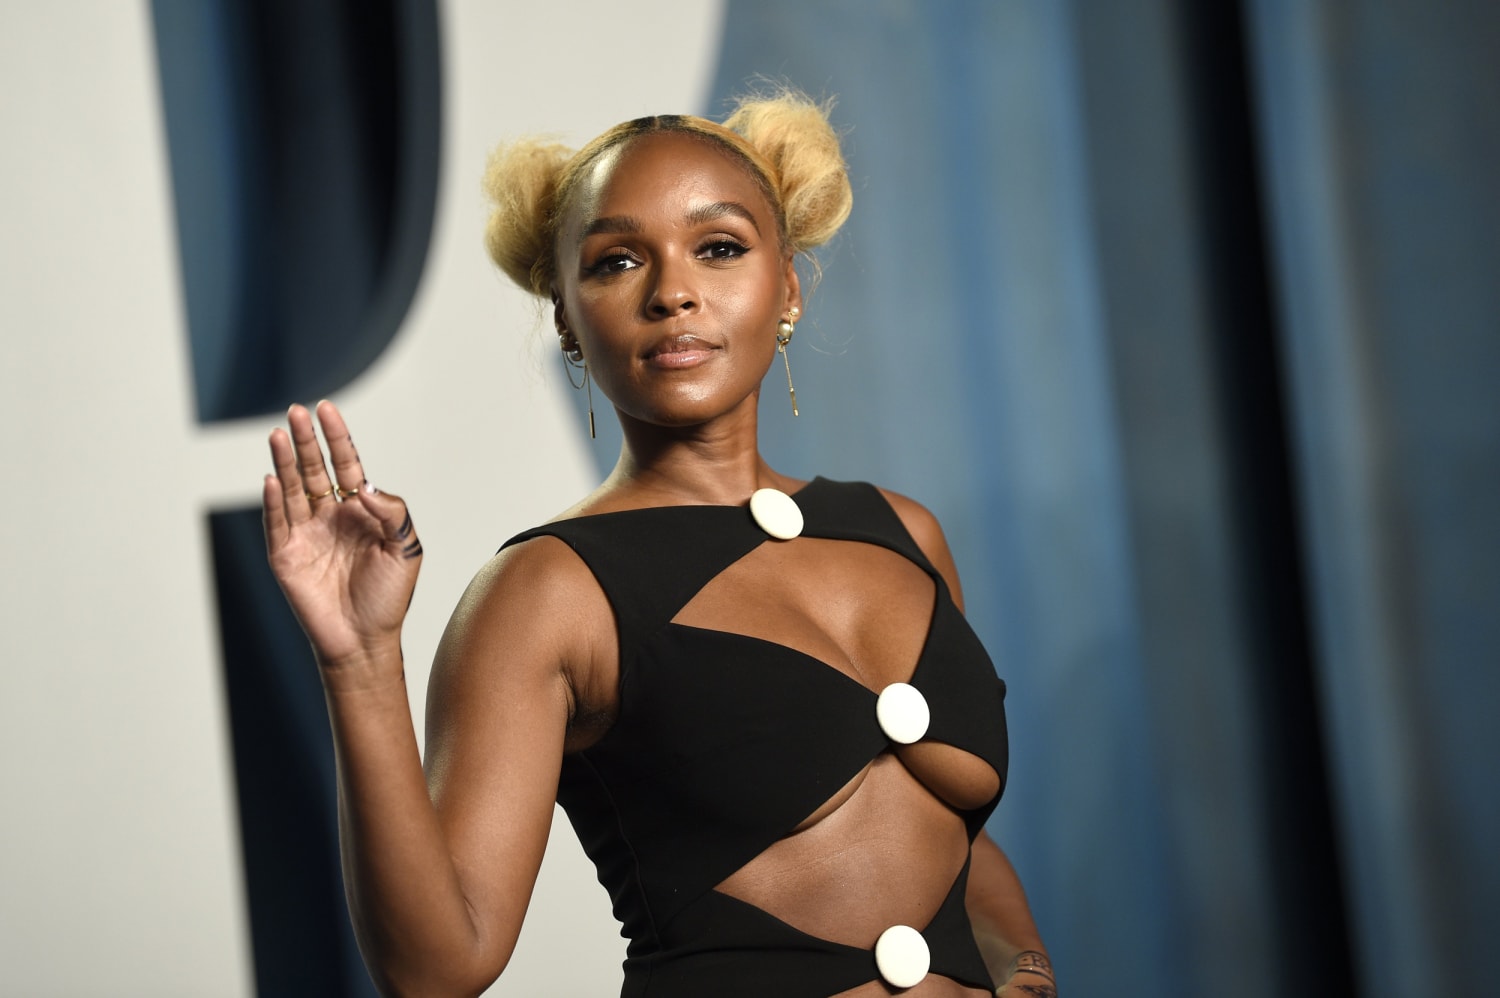 I am everything Janelle Monáe confirms shes nonbinary in new interview photo pic